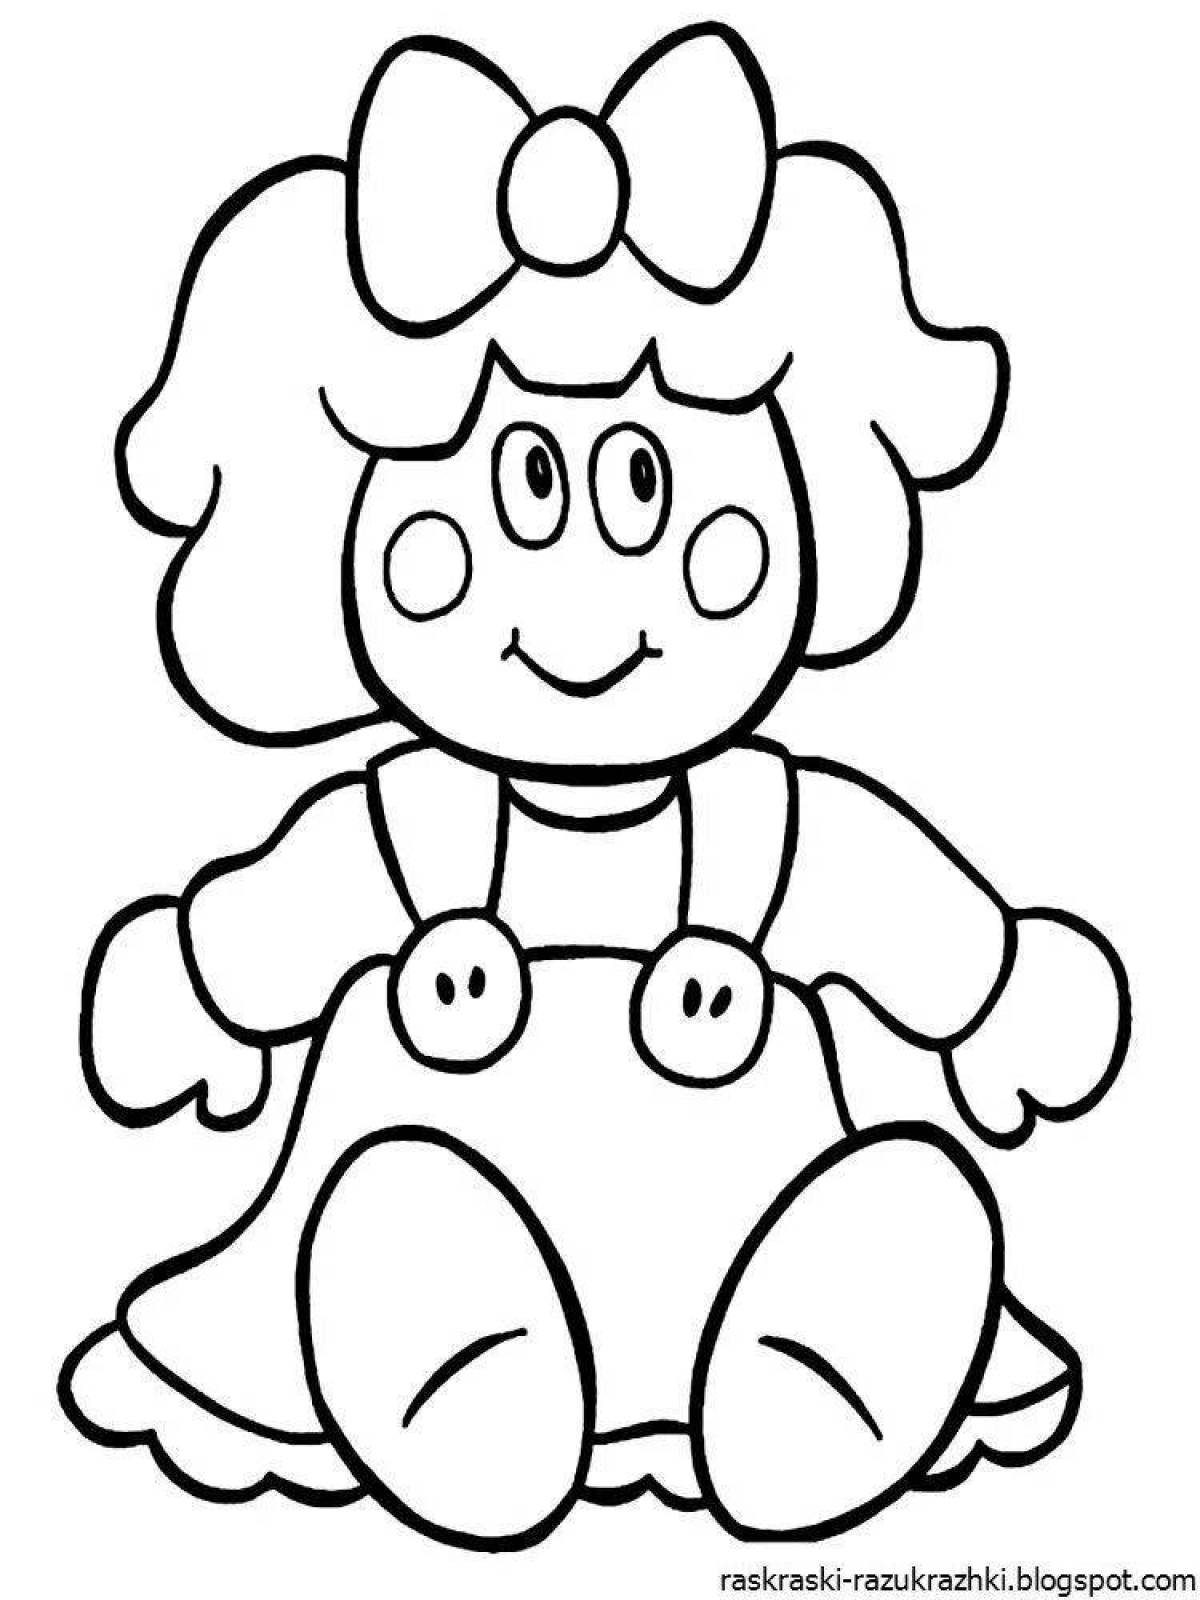 Adorable doll coloring book for 2-3 year olds